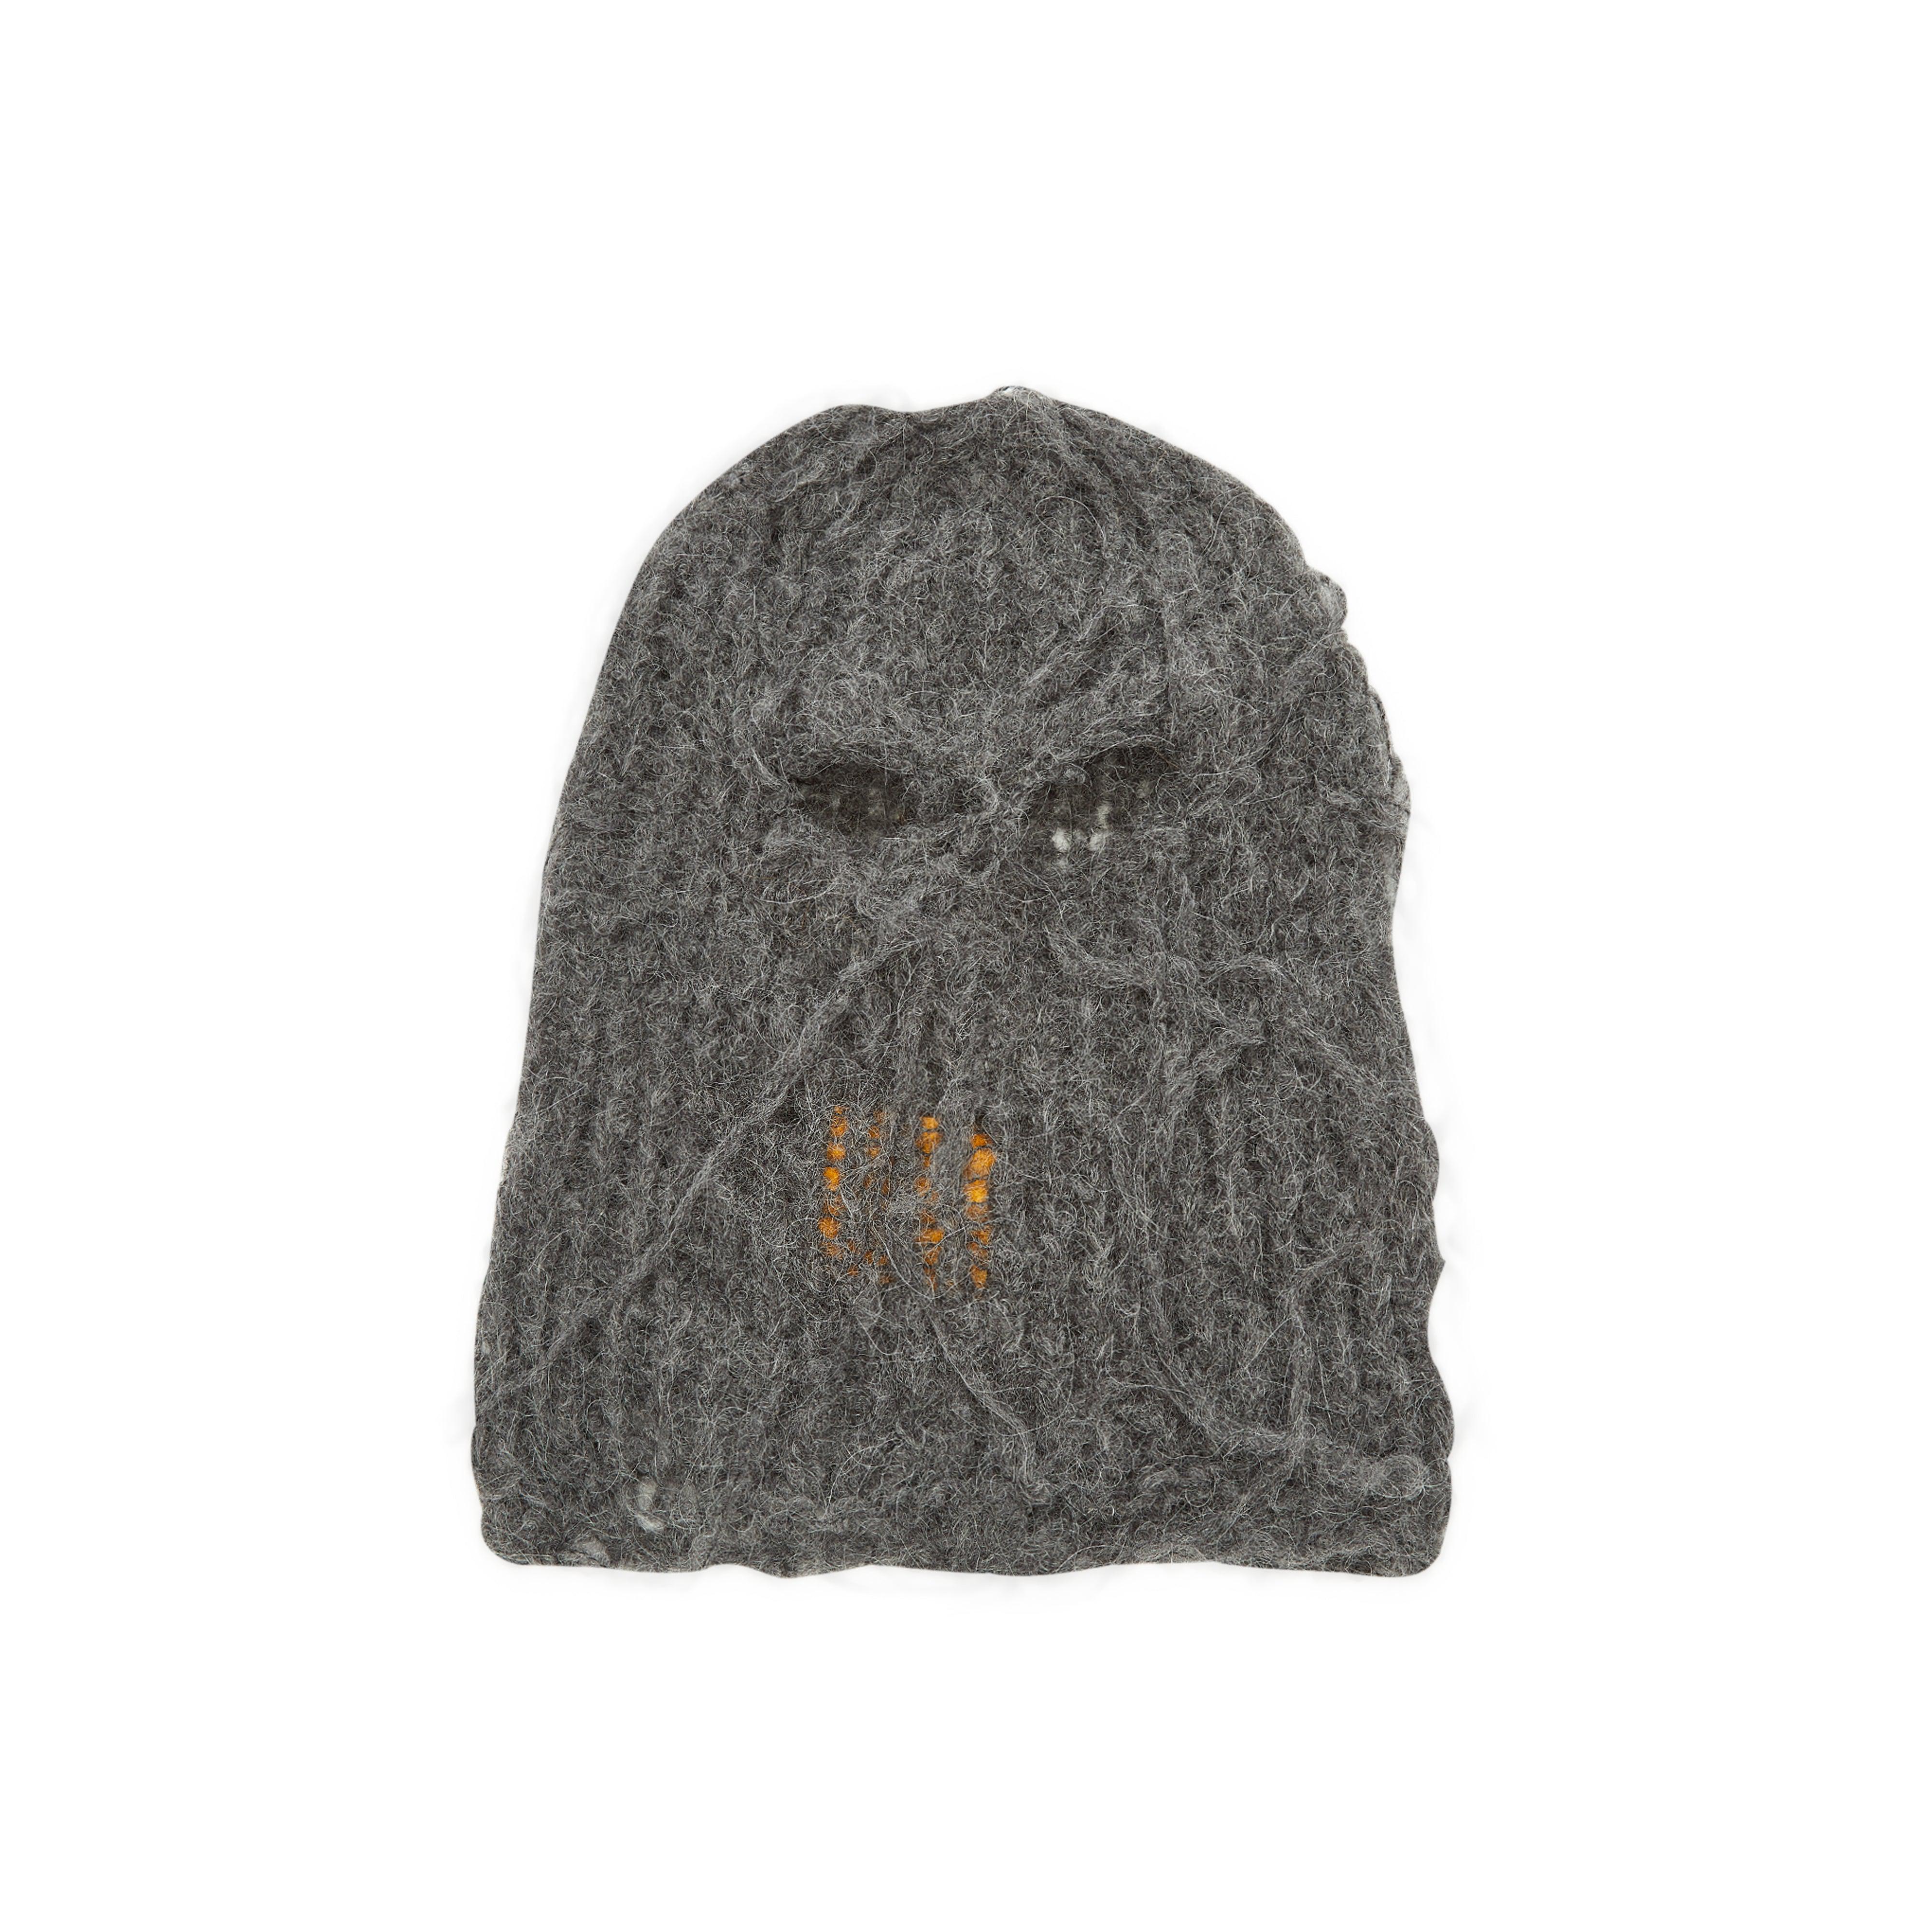 Airei Men's Hand Knit Balaclava (Black) by AIREI